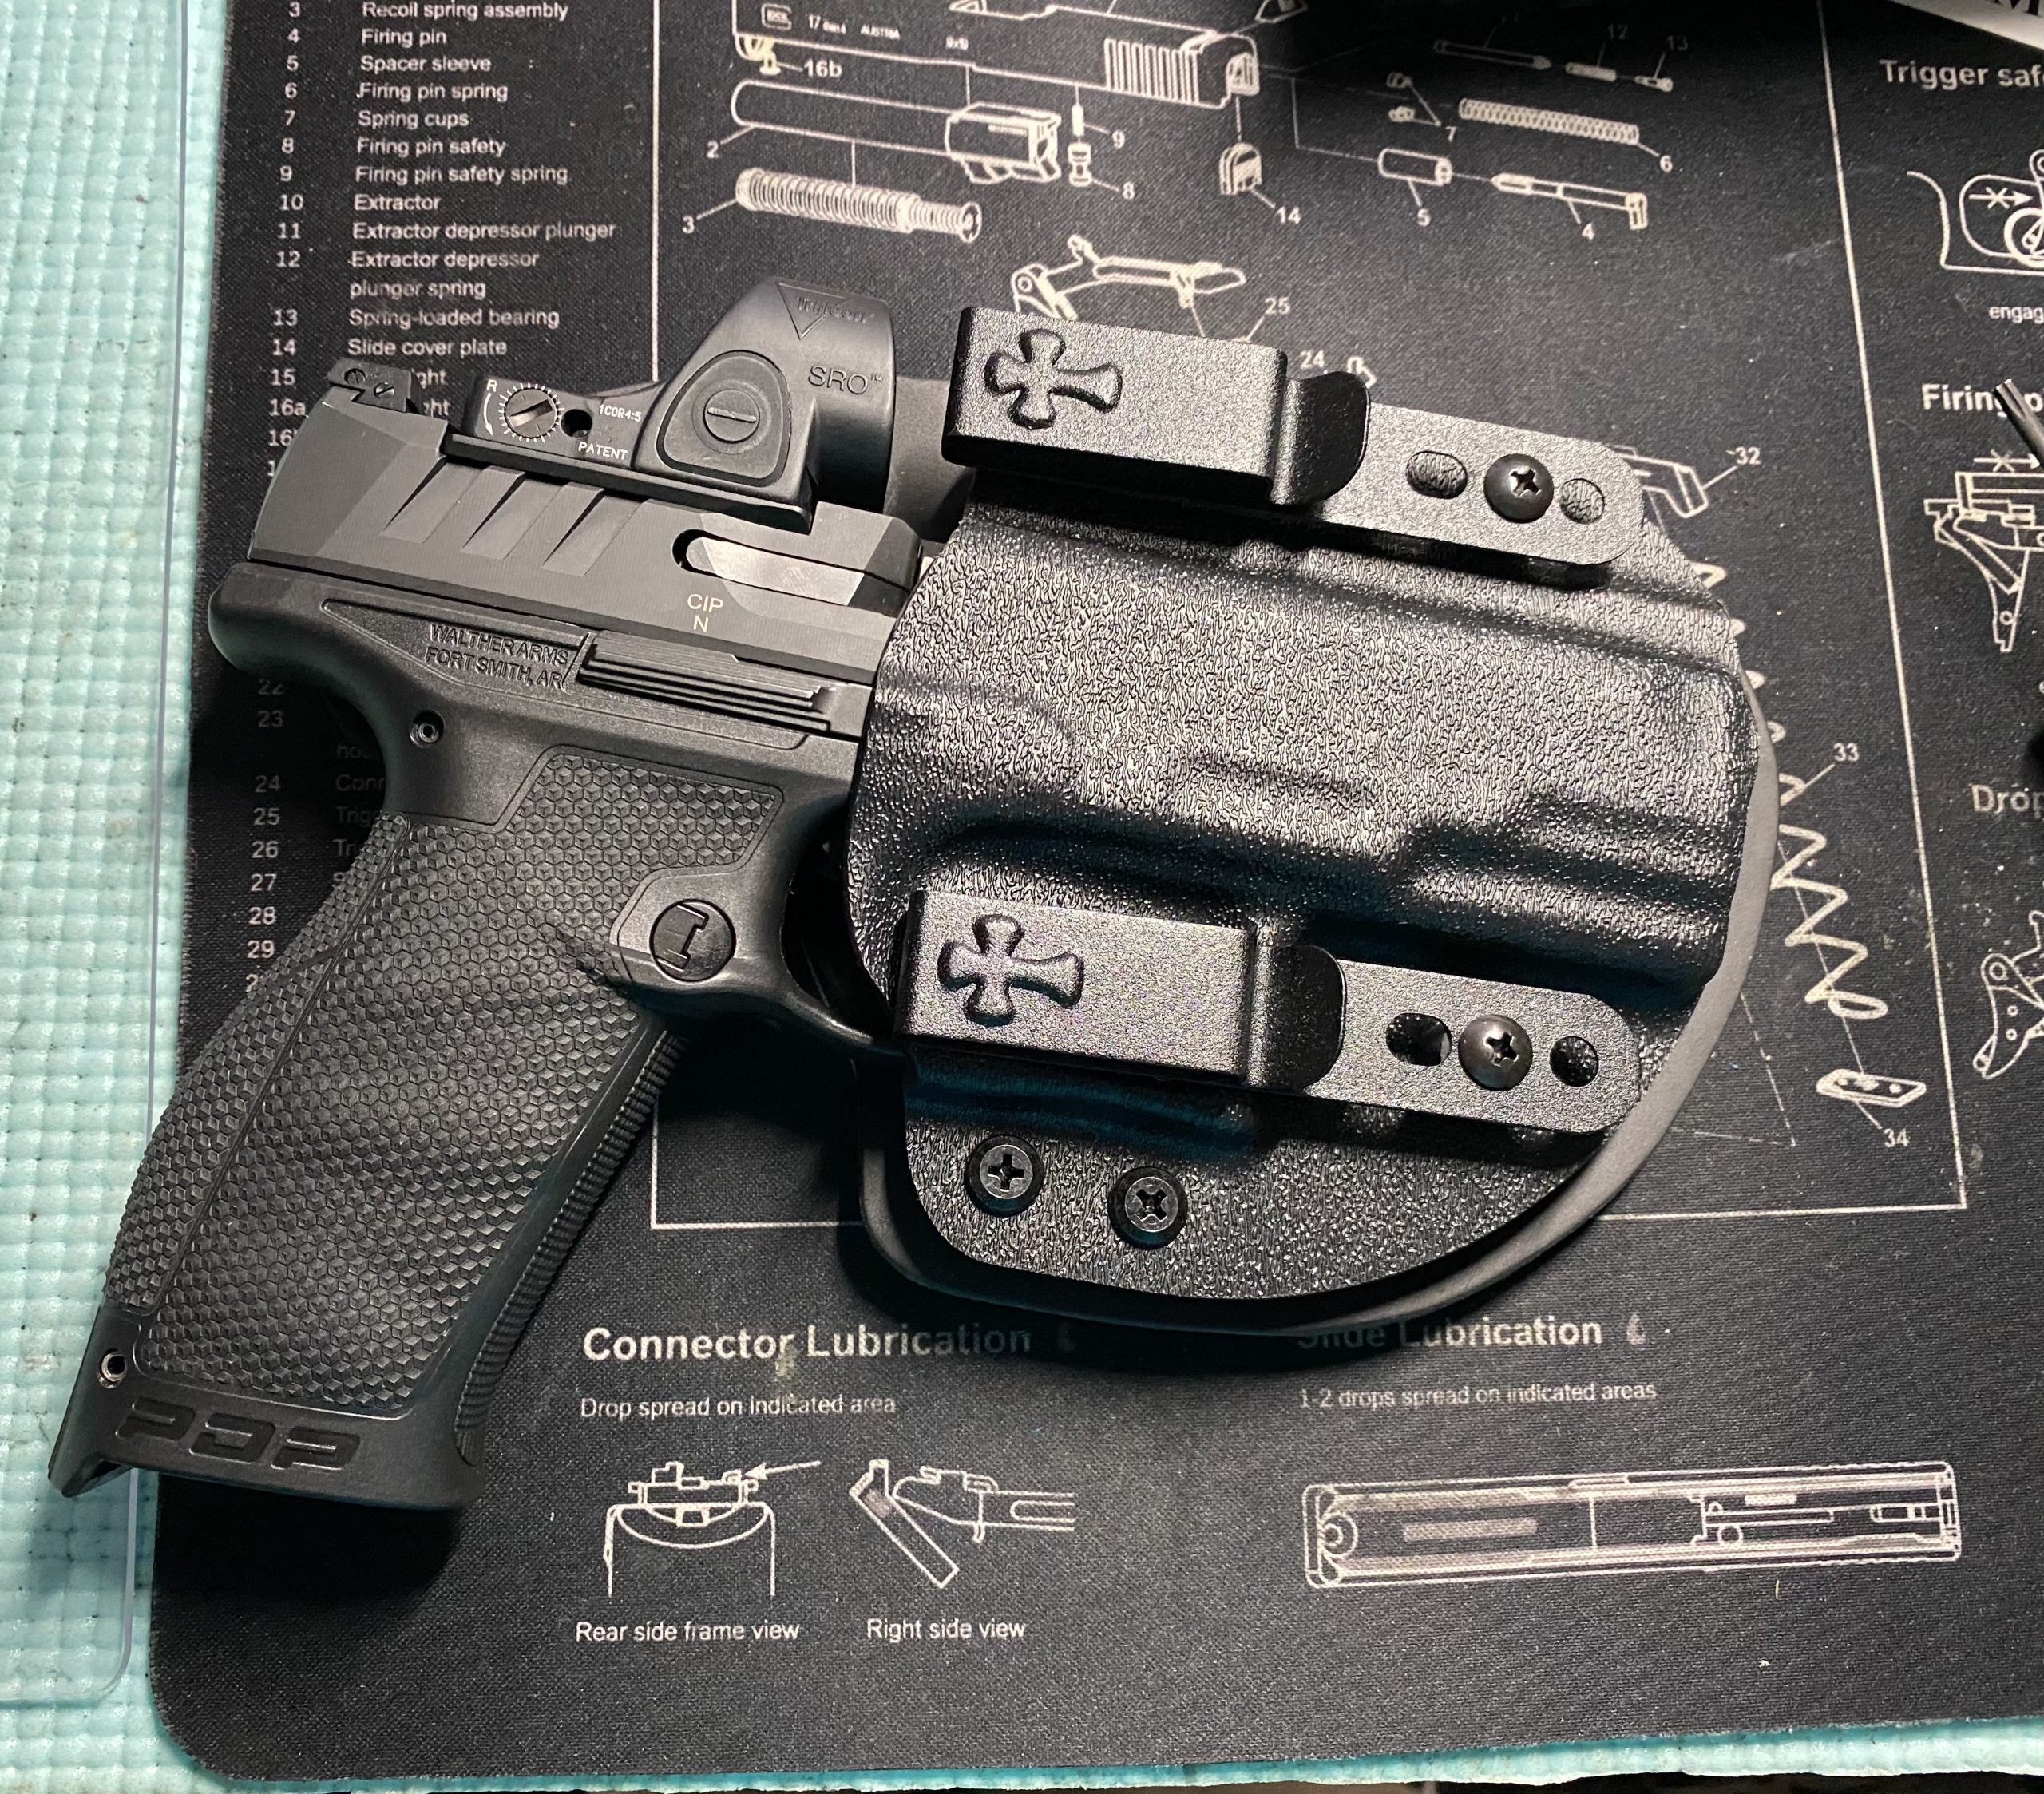 https://blog.crossbreedholsters.com/wp-content/uploads/2021/11/Walther-PDP-with-Crossbreed-Holster-scaled.jpg